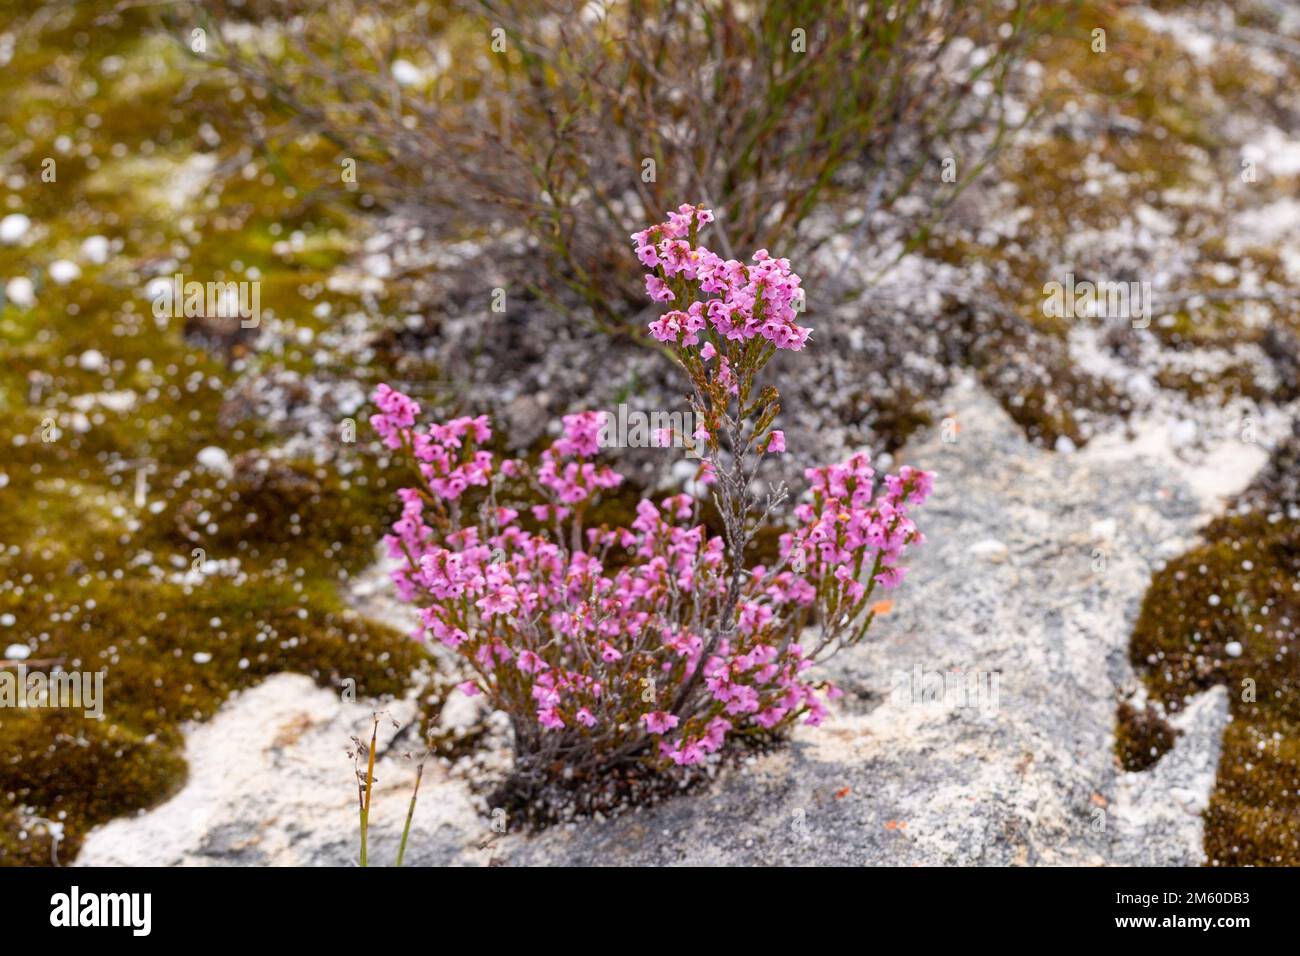 pink flowered Erica in natural habitat in South Africa Stock Photo